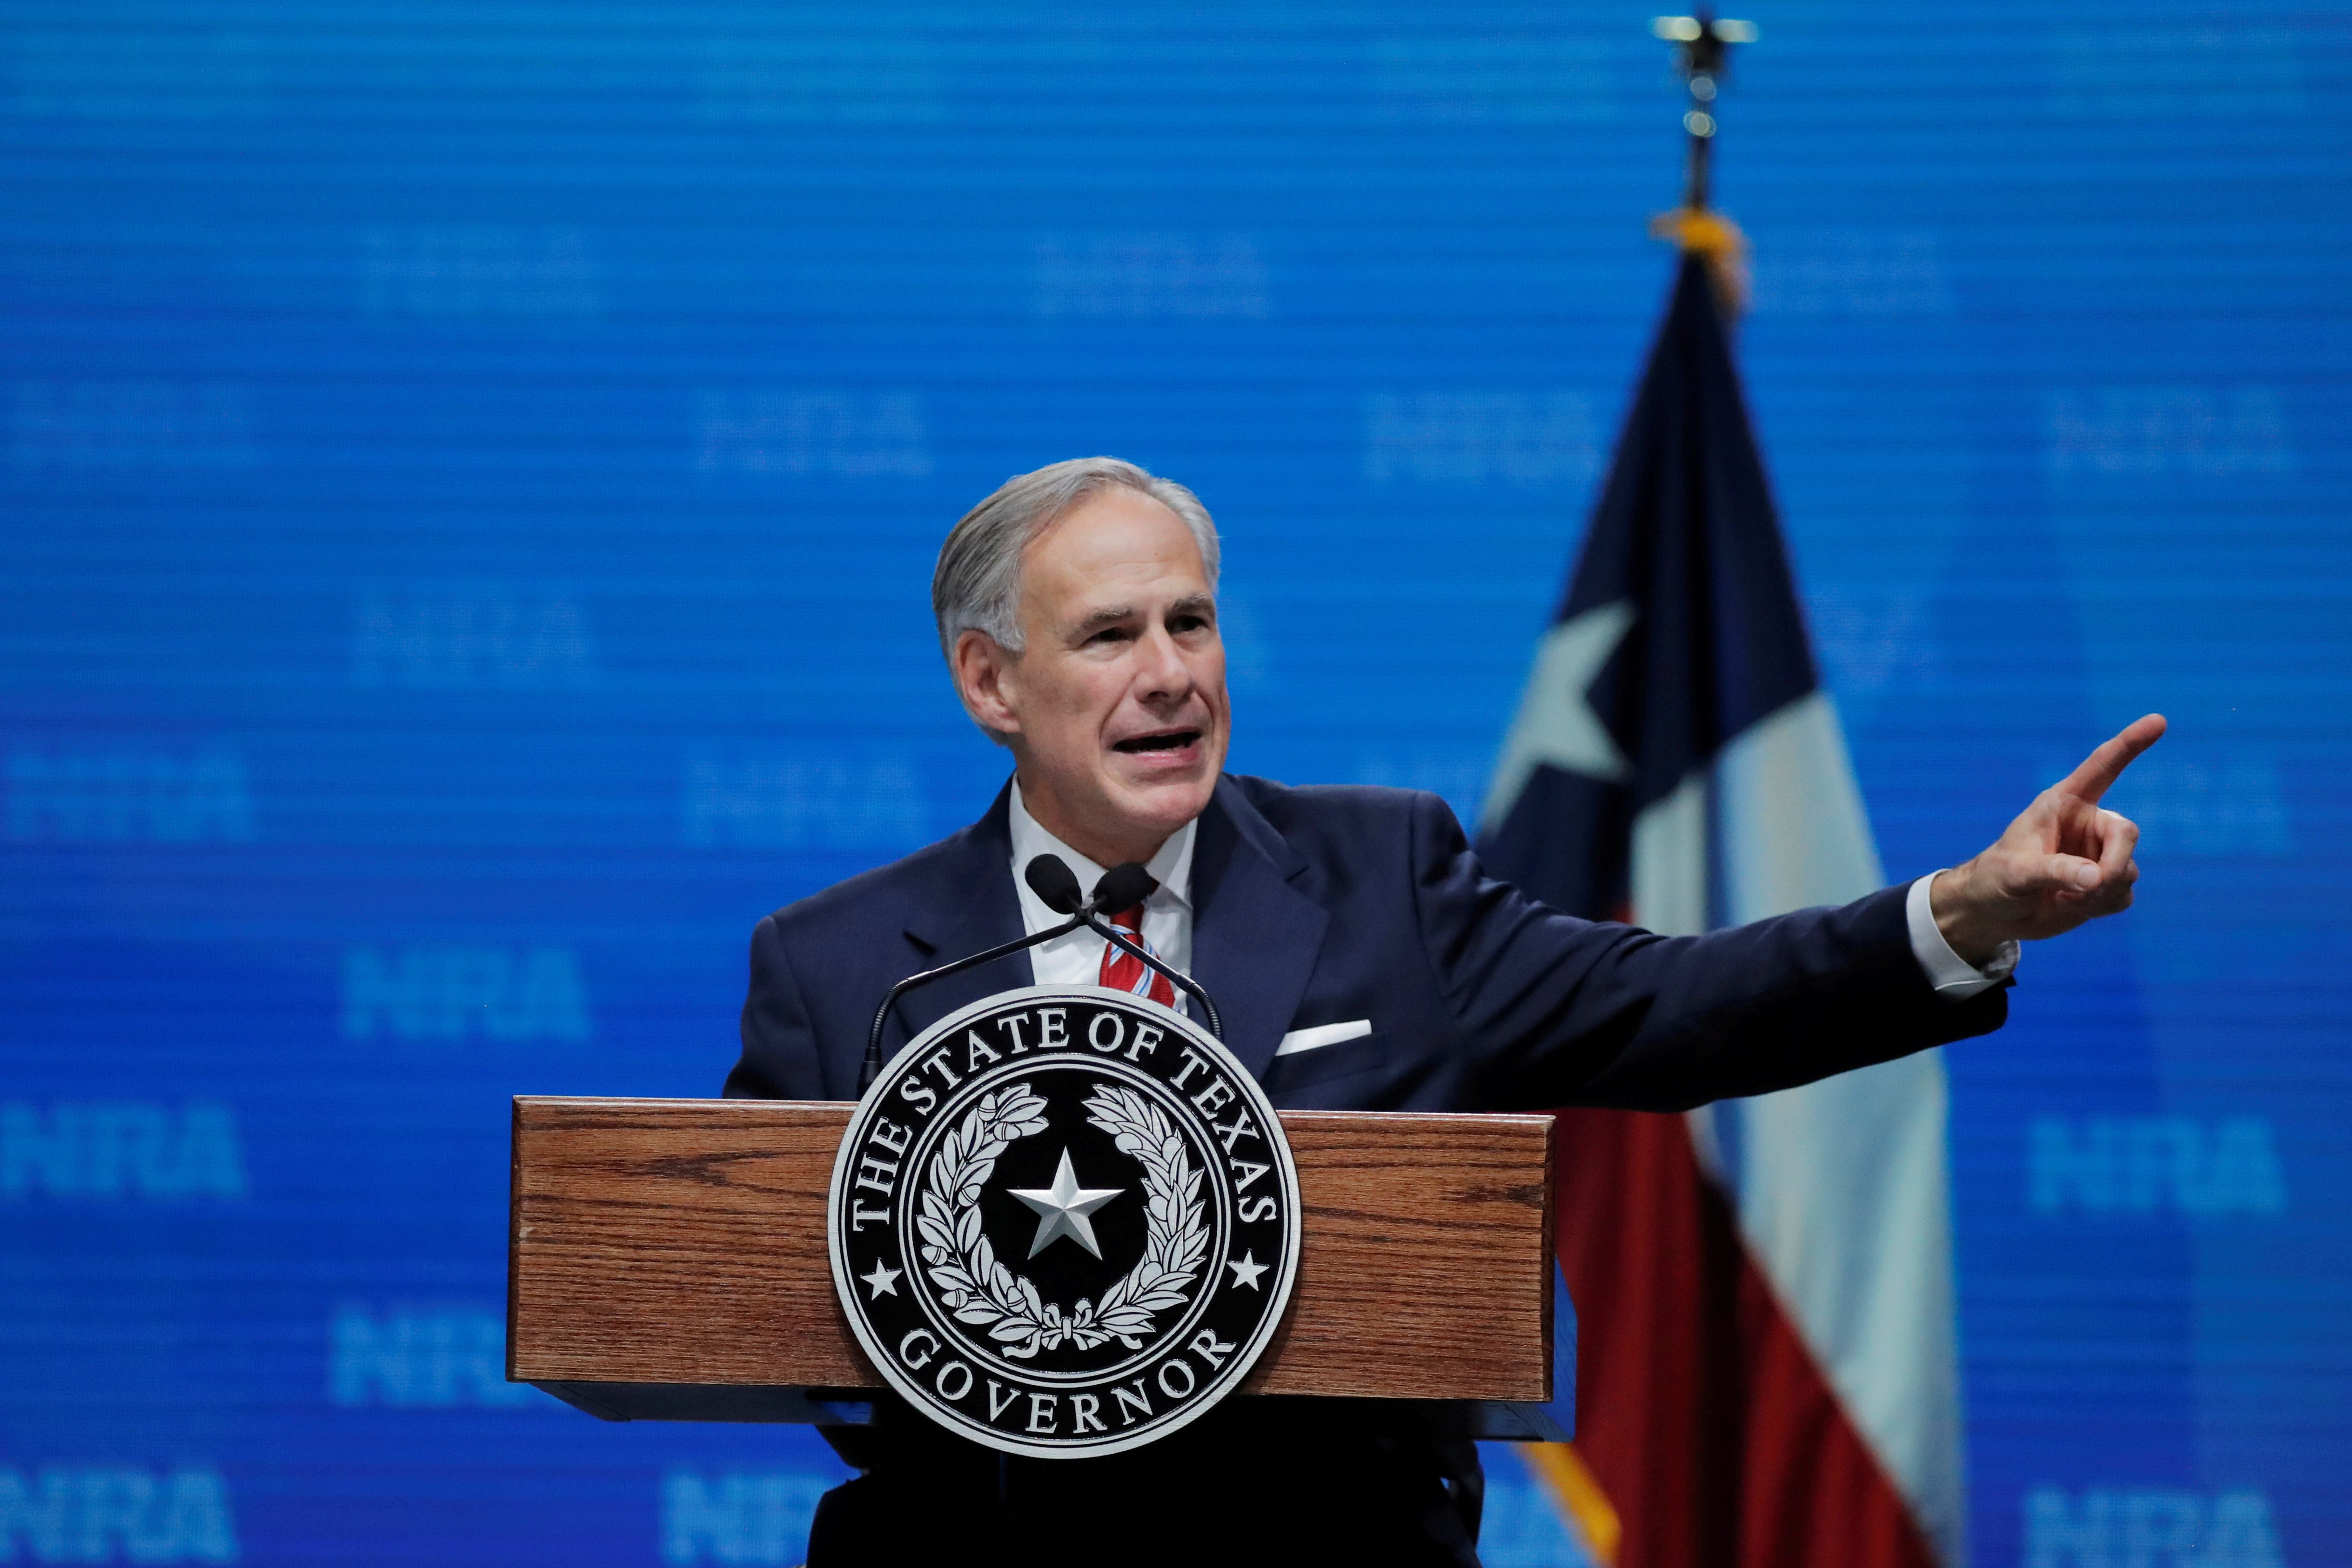 Texas lawmakers to consider sweeping voting restrictions